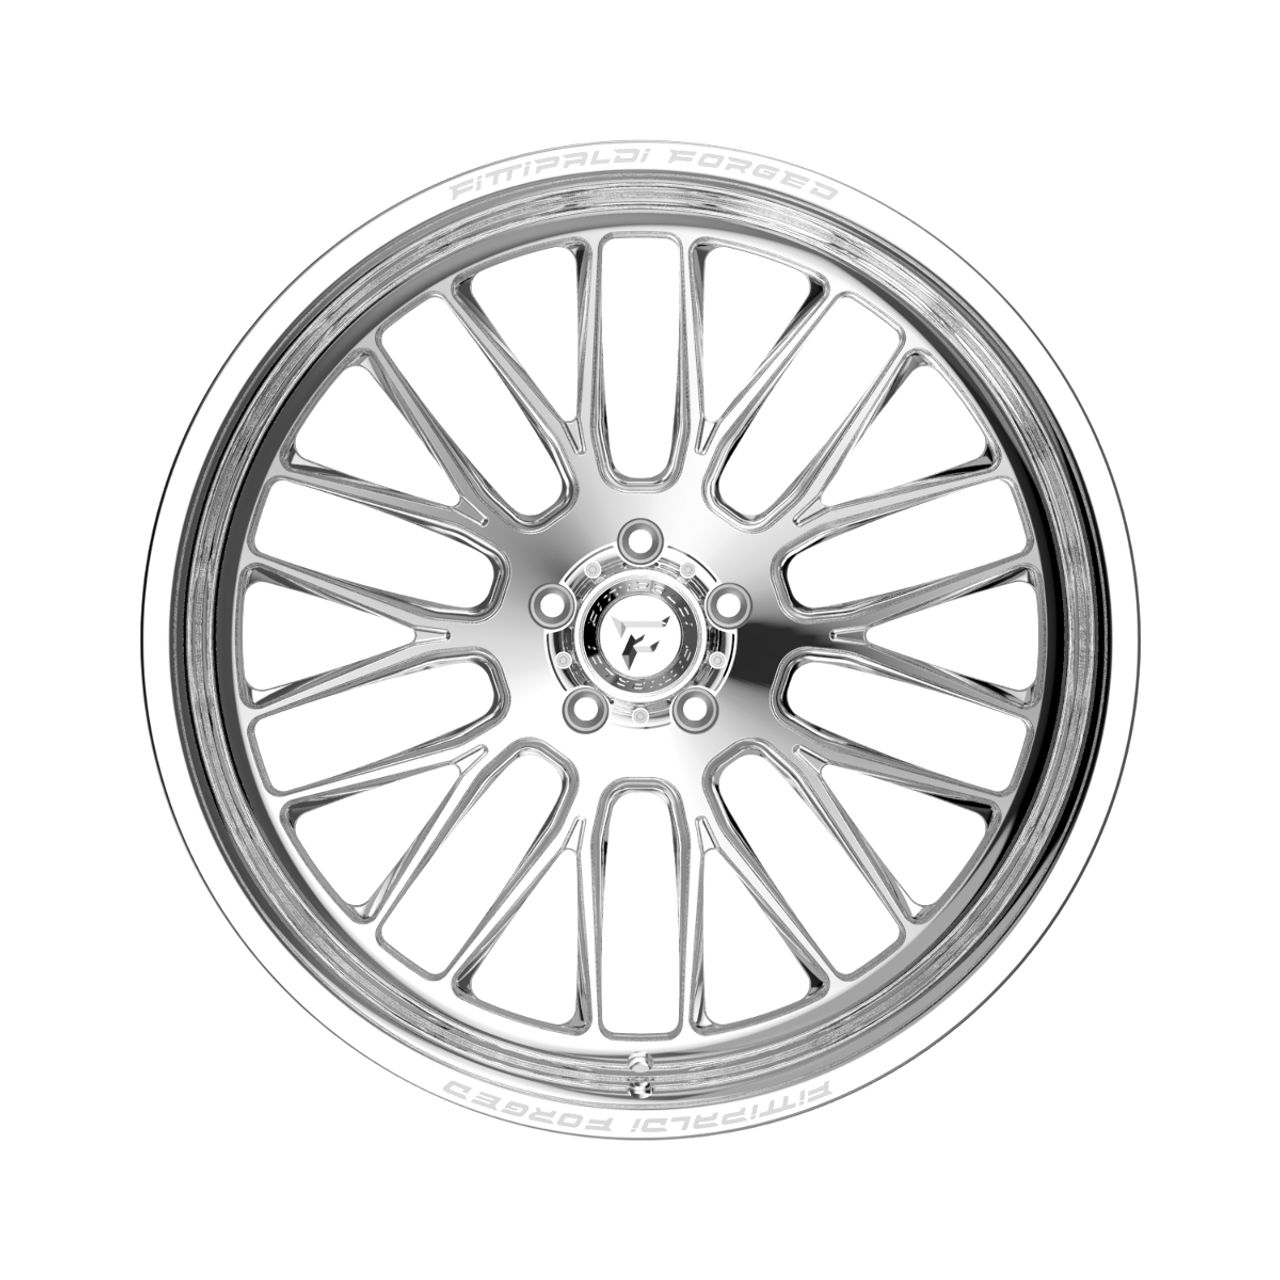 24" Fittipaldi Wheel FTF502P 24x14 Polished 8x180 -76mm Lifted For Chevy GMC Rim